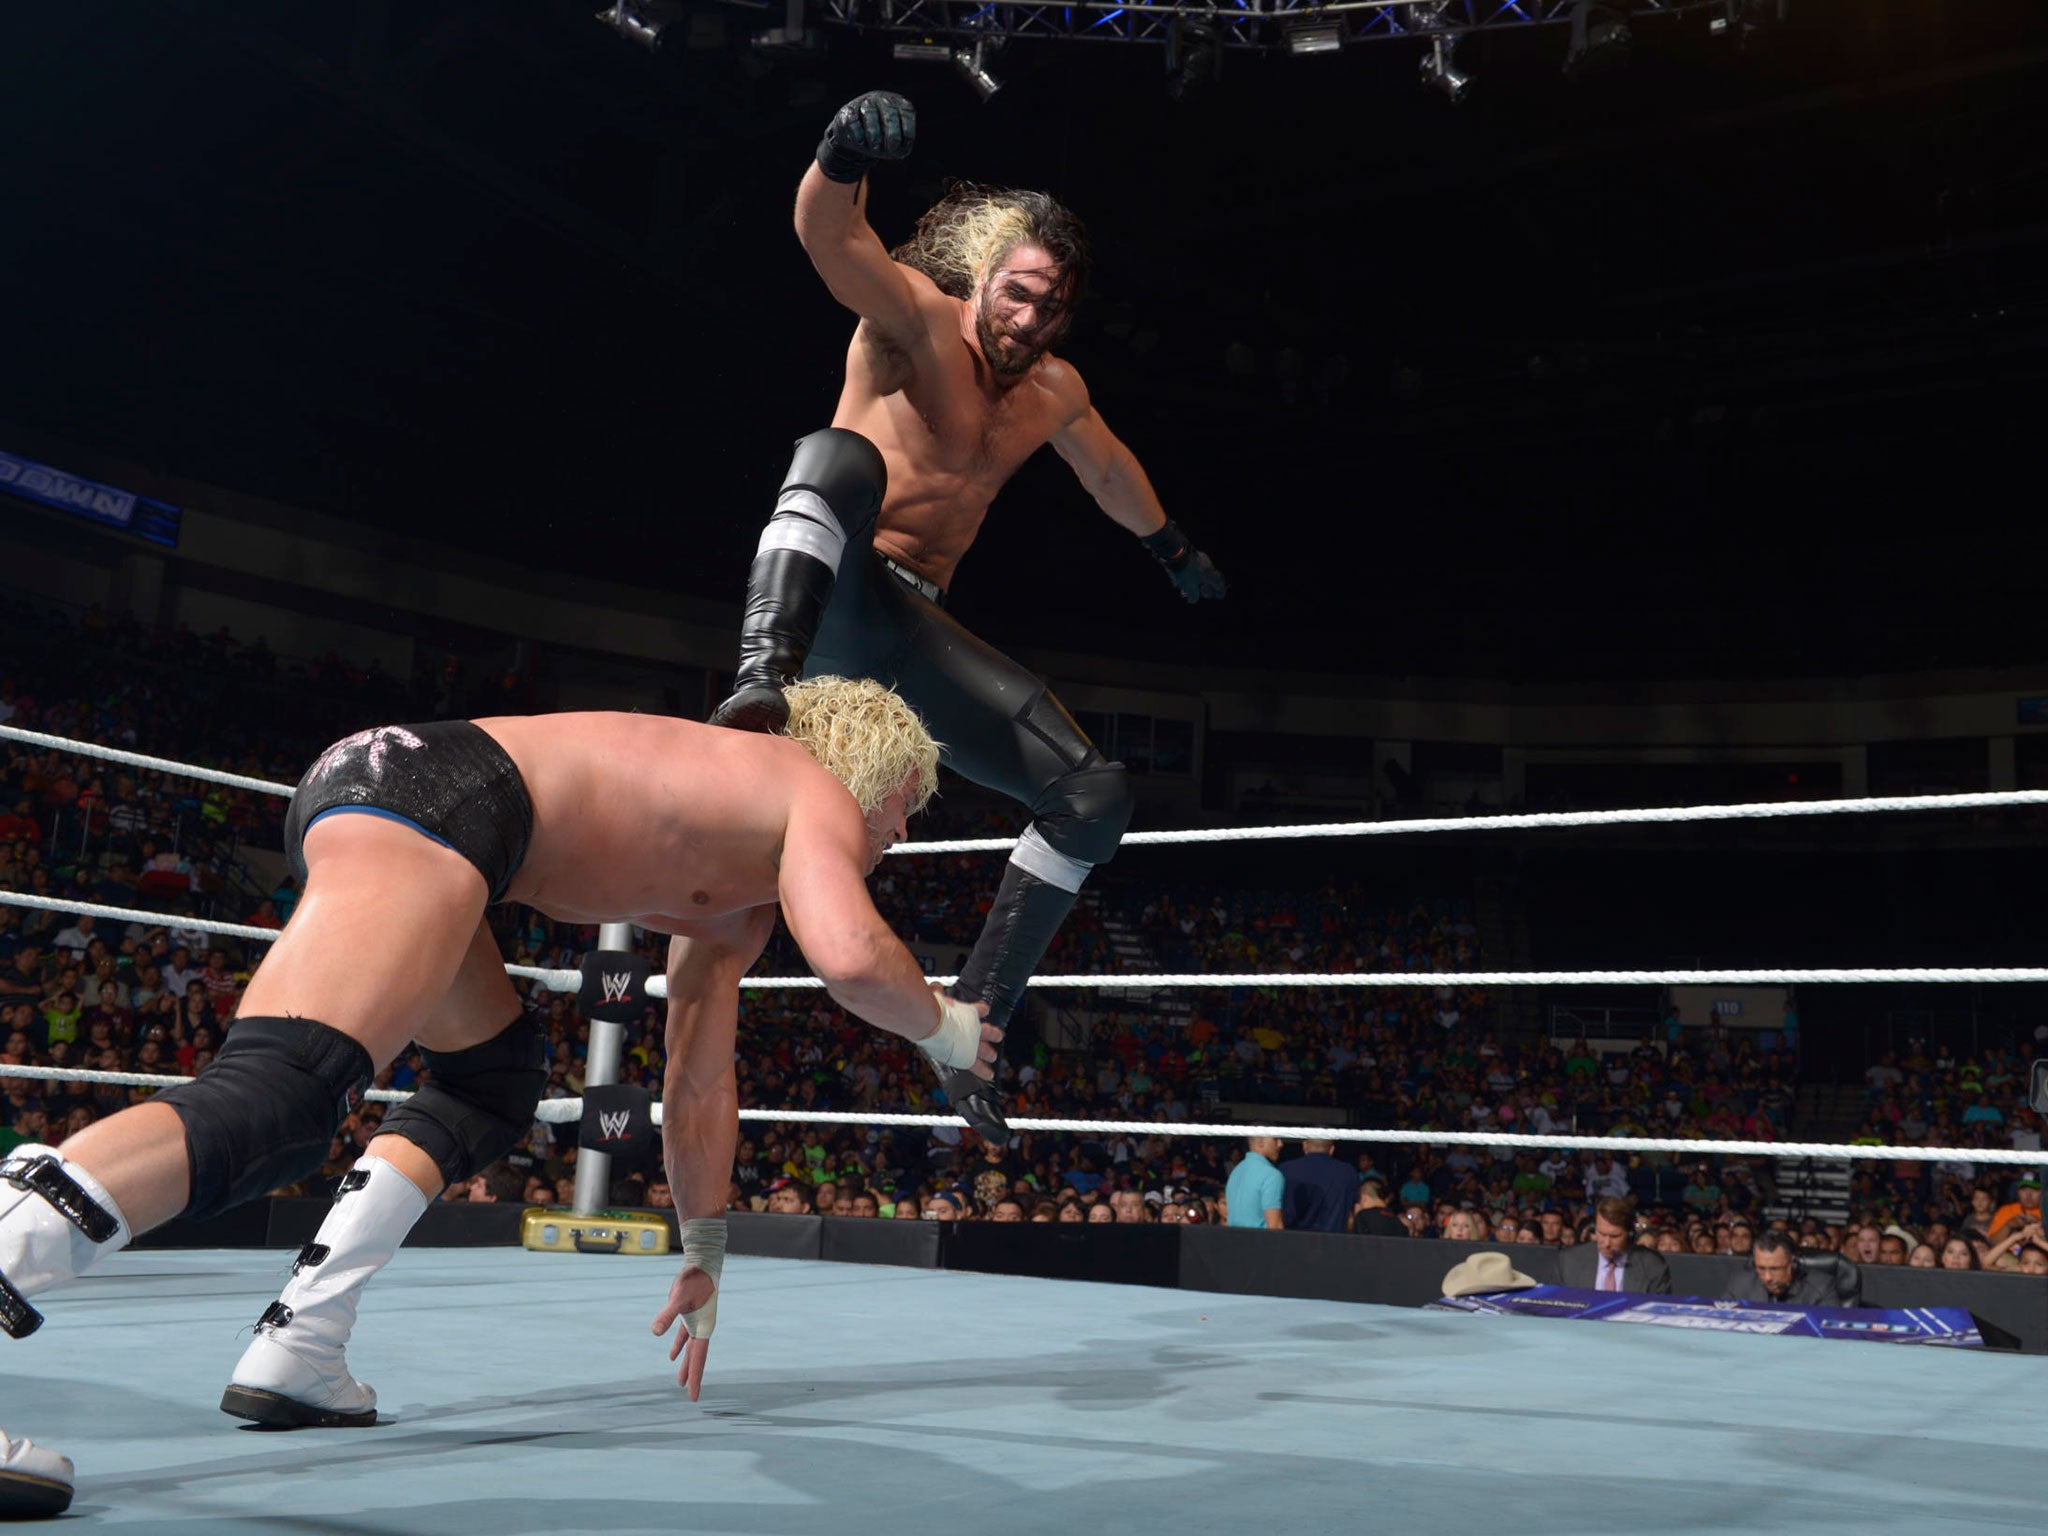 Rollins delivers his trademark finisher, a curb stomp, to Dolph Ziggler